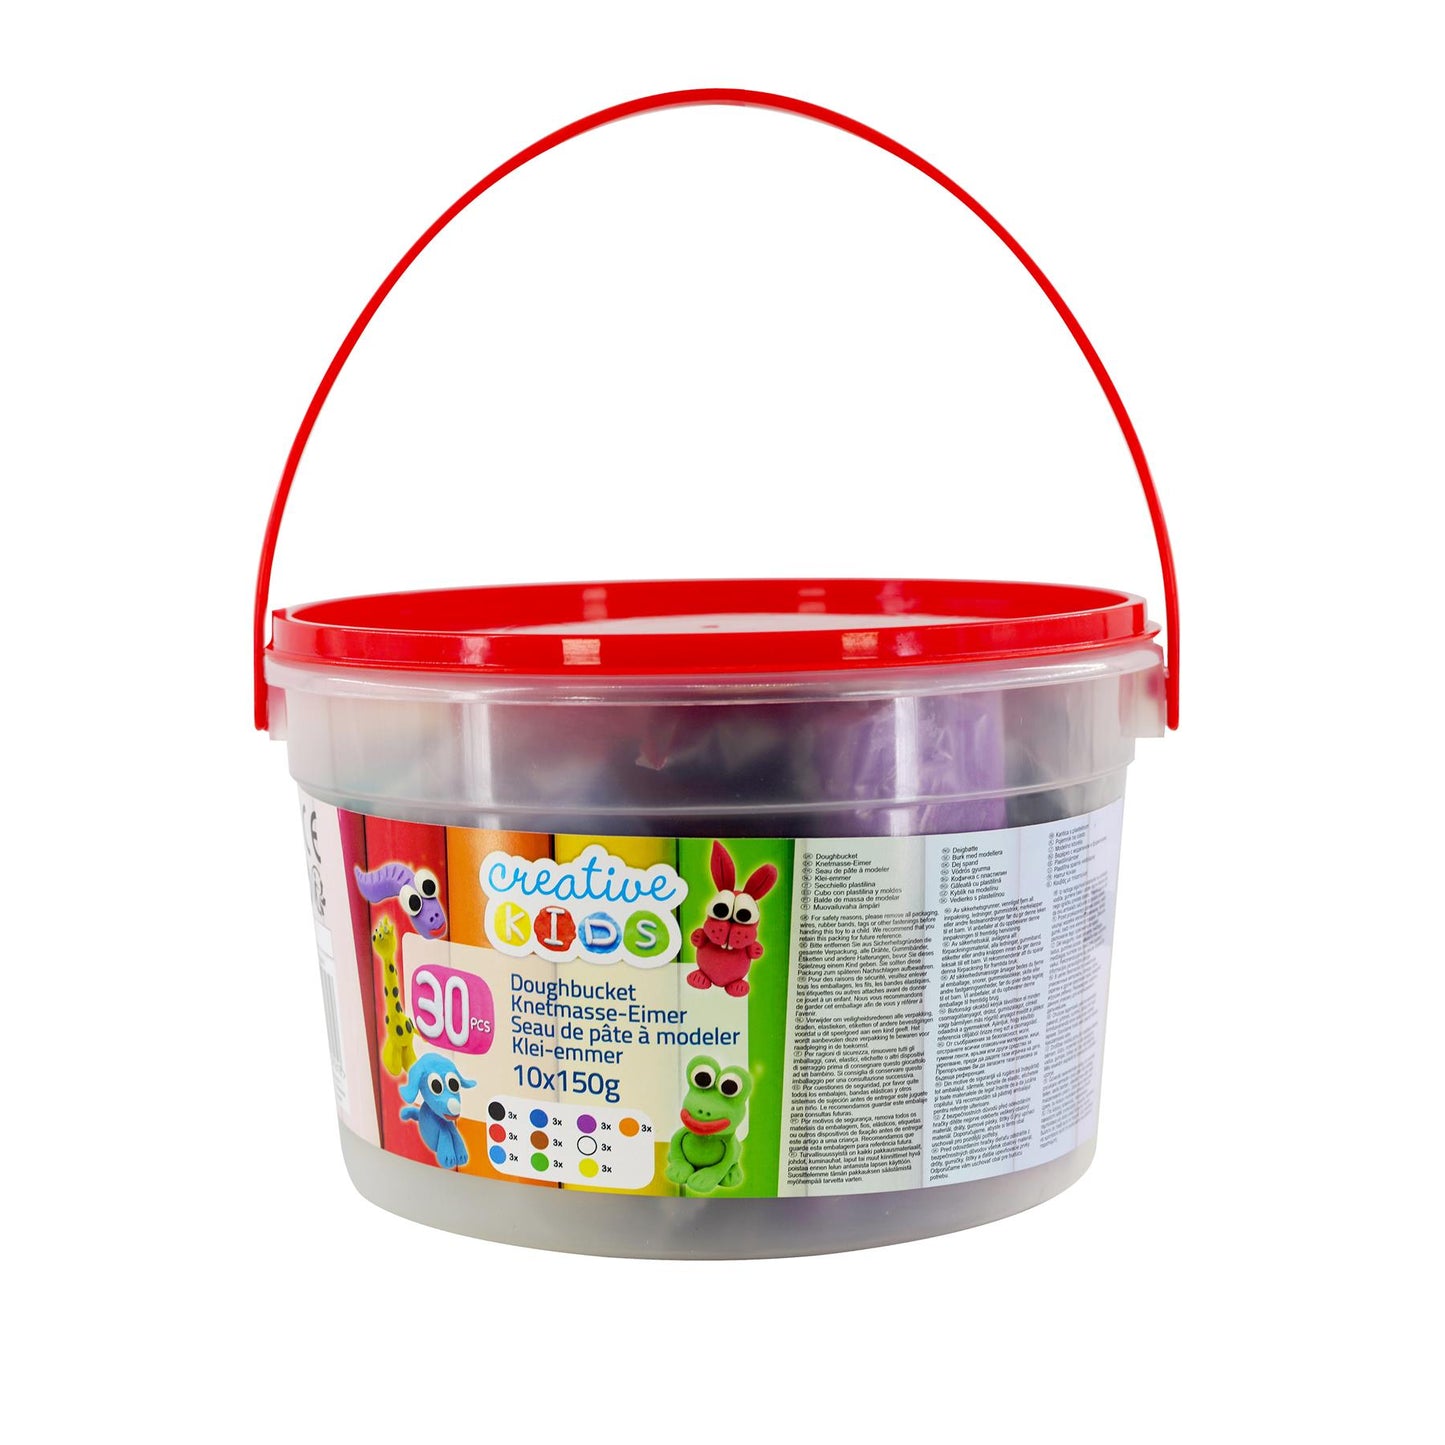 1.5 Kg Giant Play Dough Set in Bucket by The Magic Toy Shop - UKBuyZone